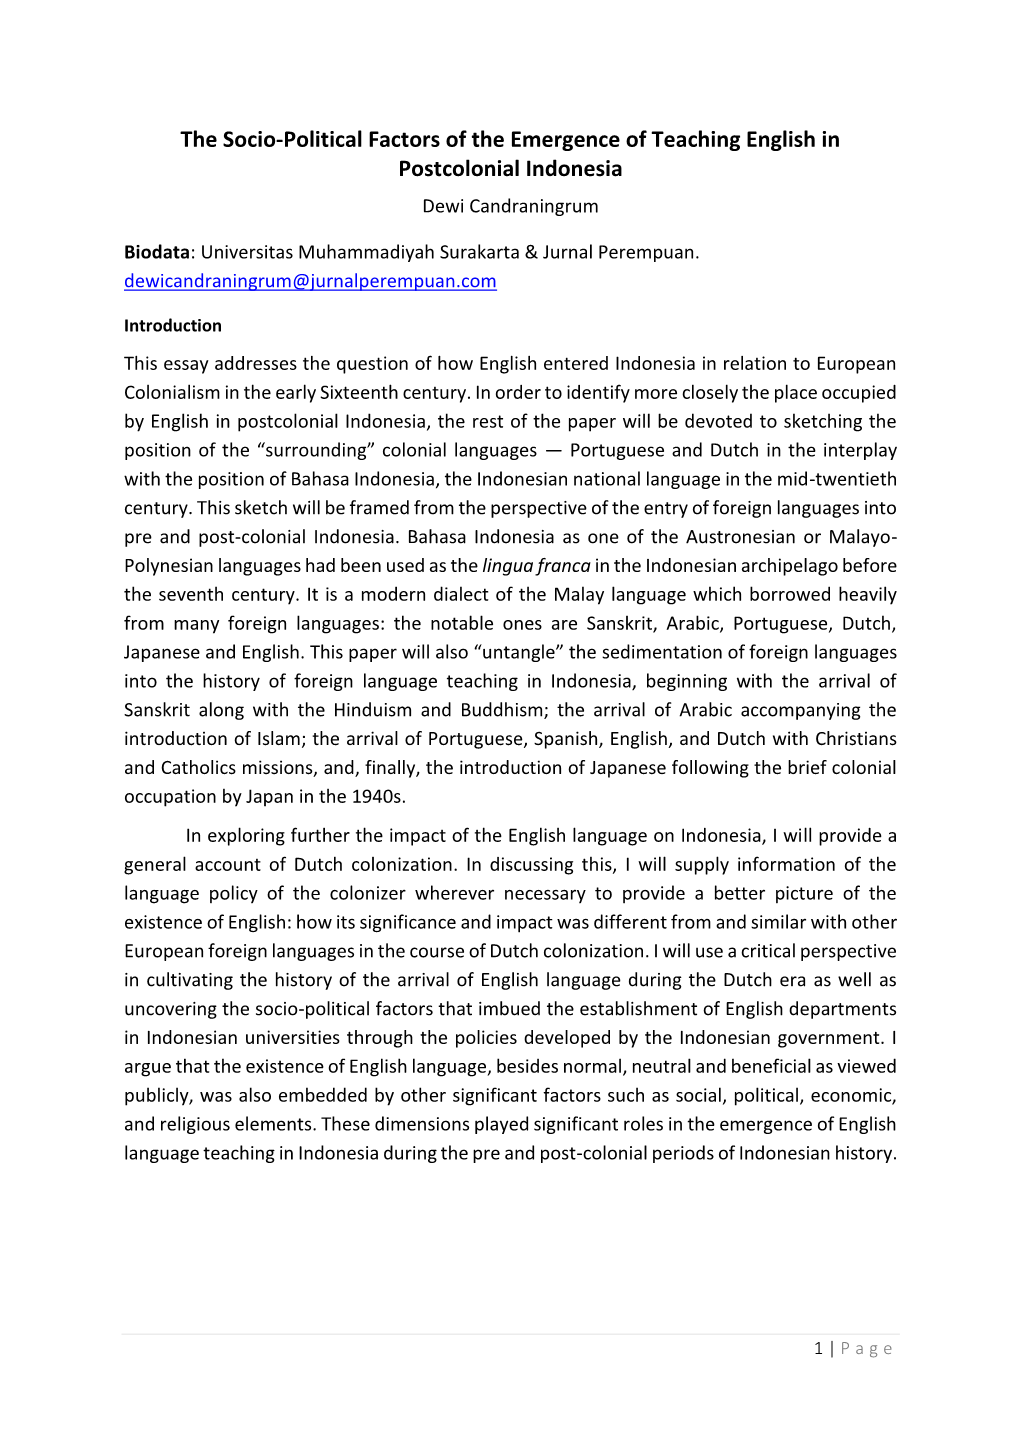 The Socio-Political Factors of the Emergence of Teaching English in Postcolonial Indonesia Dewi Candraningrum